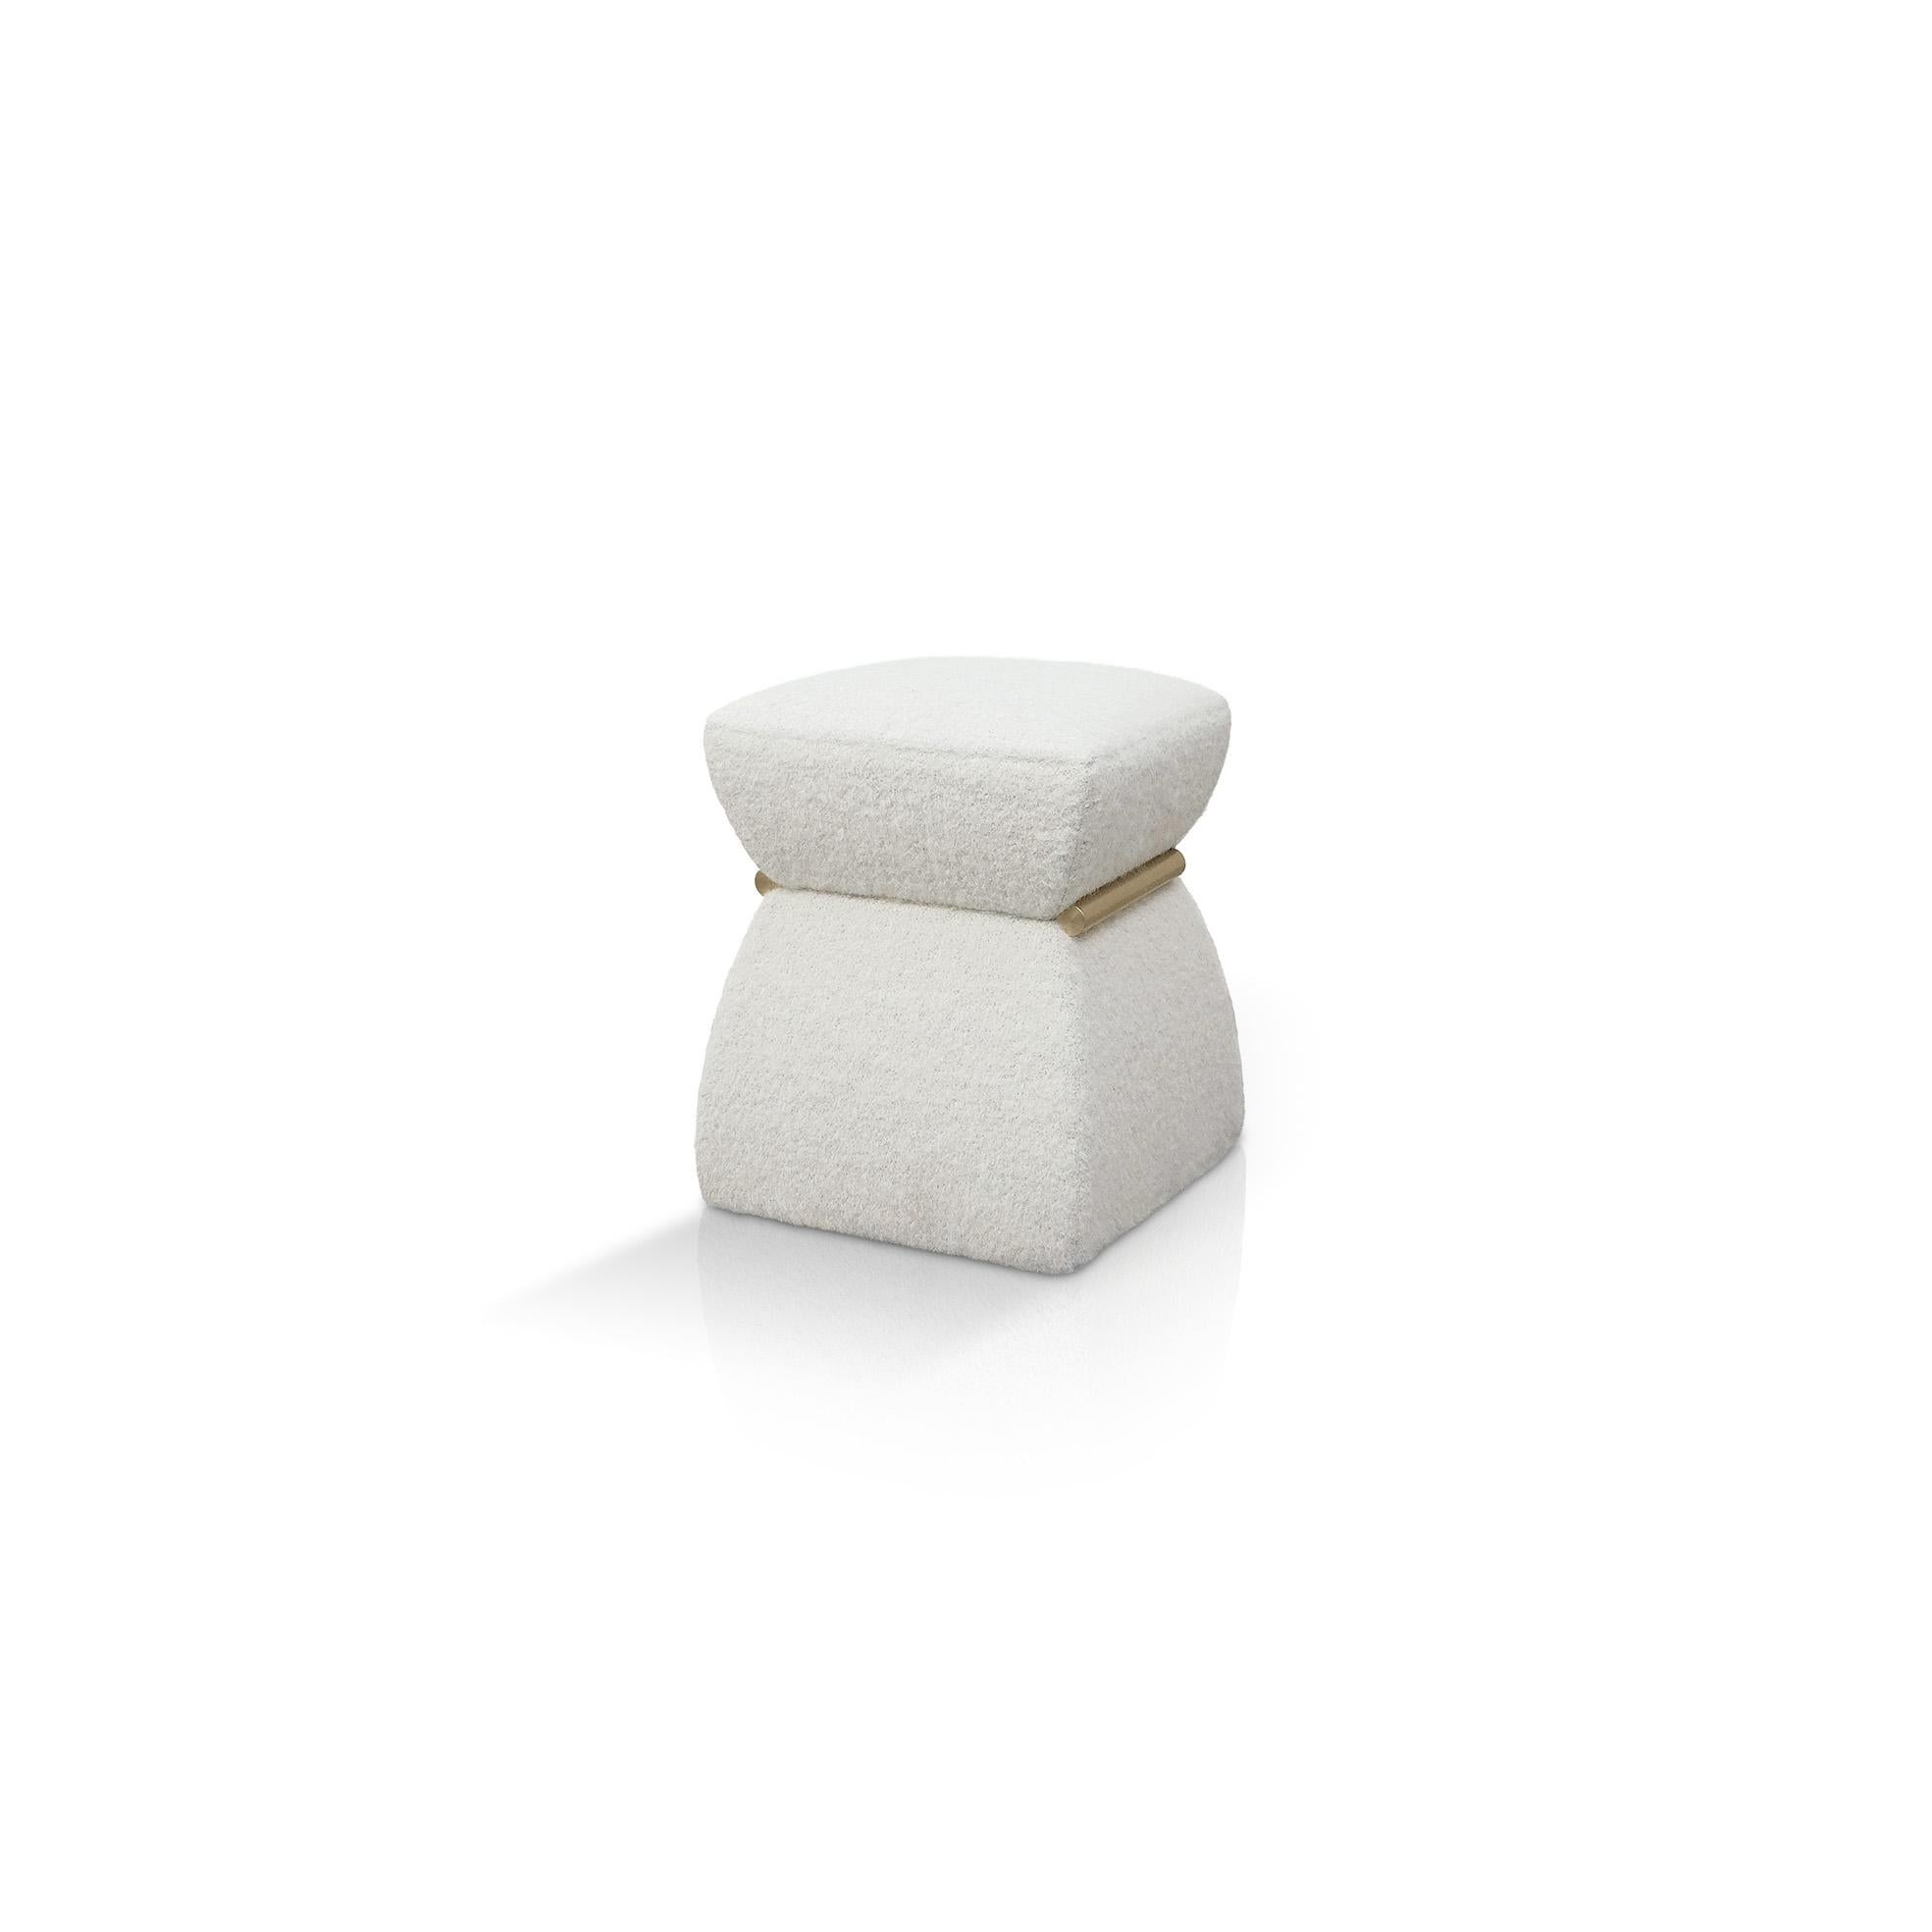 A stool, an ottoman and a side table in one stylish piece. The Cusi Pouf is an elegant and versatile accent piece available in several colors to adapt to any design need and can also be stowed easily when not needed. The shape pays homage to